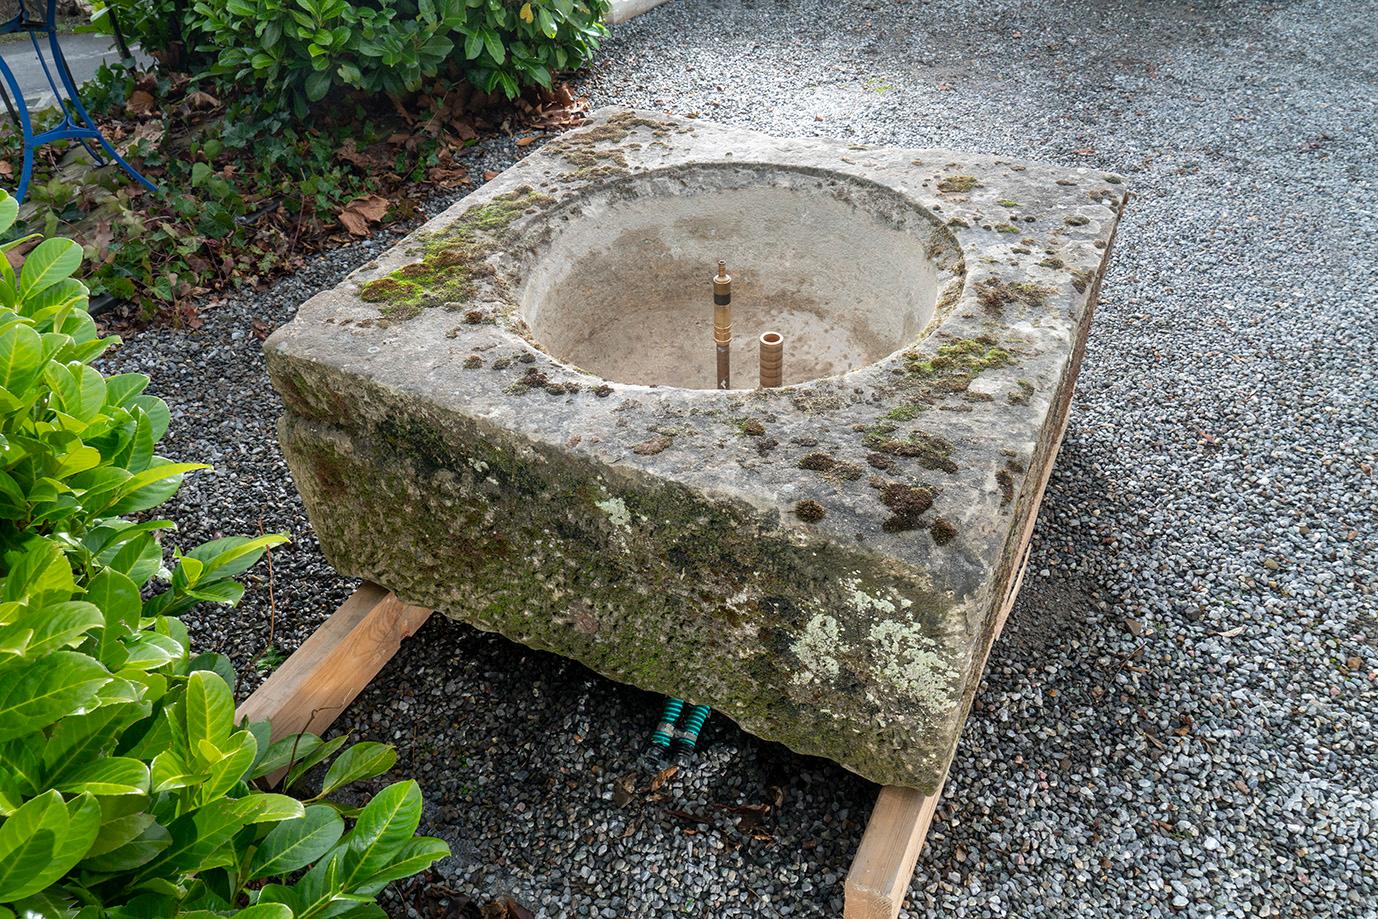 A nice well in a square base. In the middle is a water fountain.
The patina is really nice and the well is from the 18th century.
The well is not too small and not too big. Just perfect for the garden.
Maybe some little birds like to take a bath